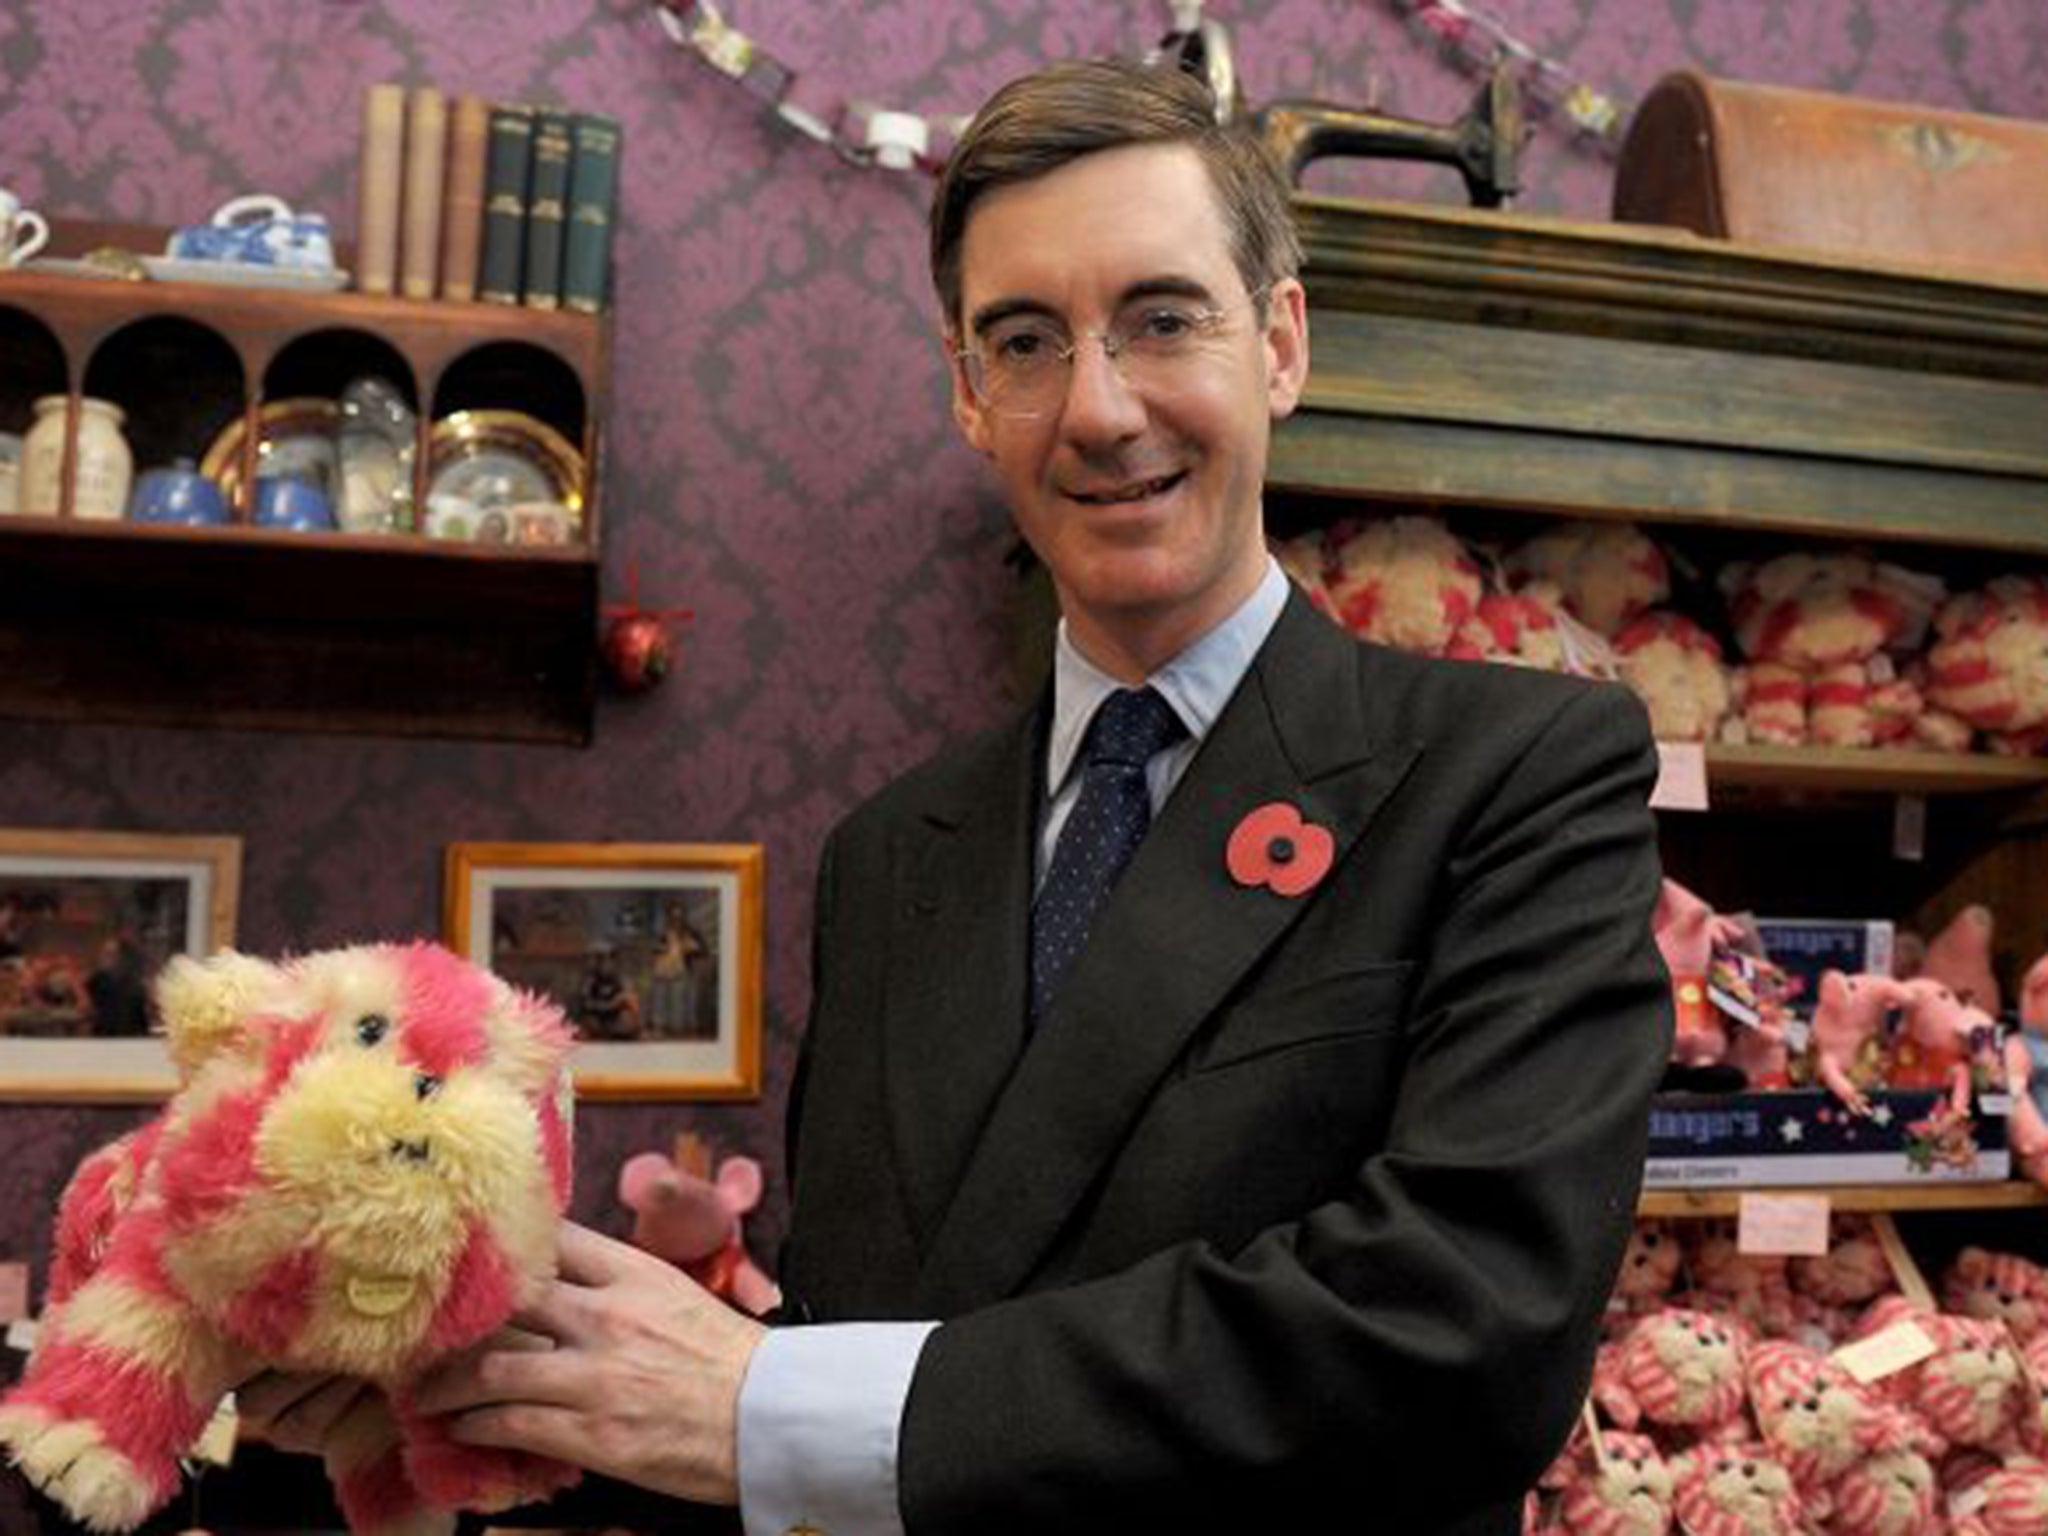 Jacob Rees-Mogg faces a Standards Commissioner 